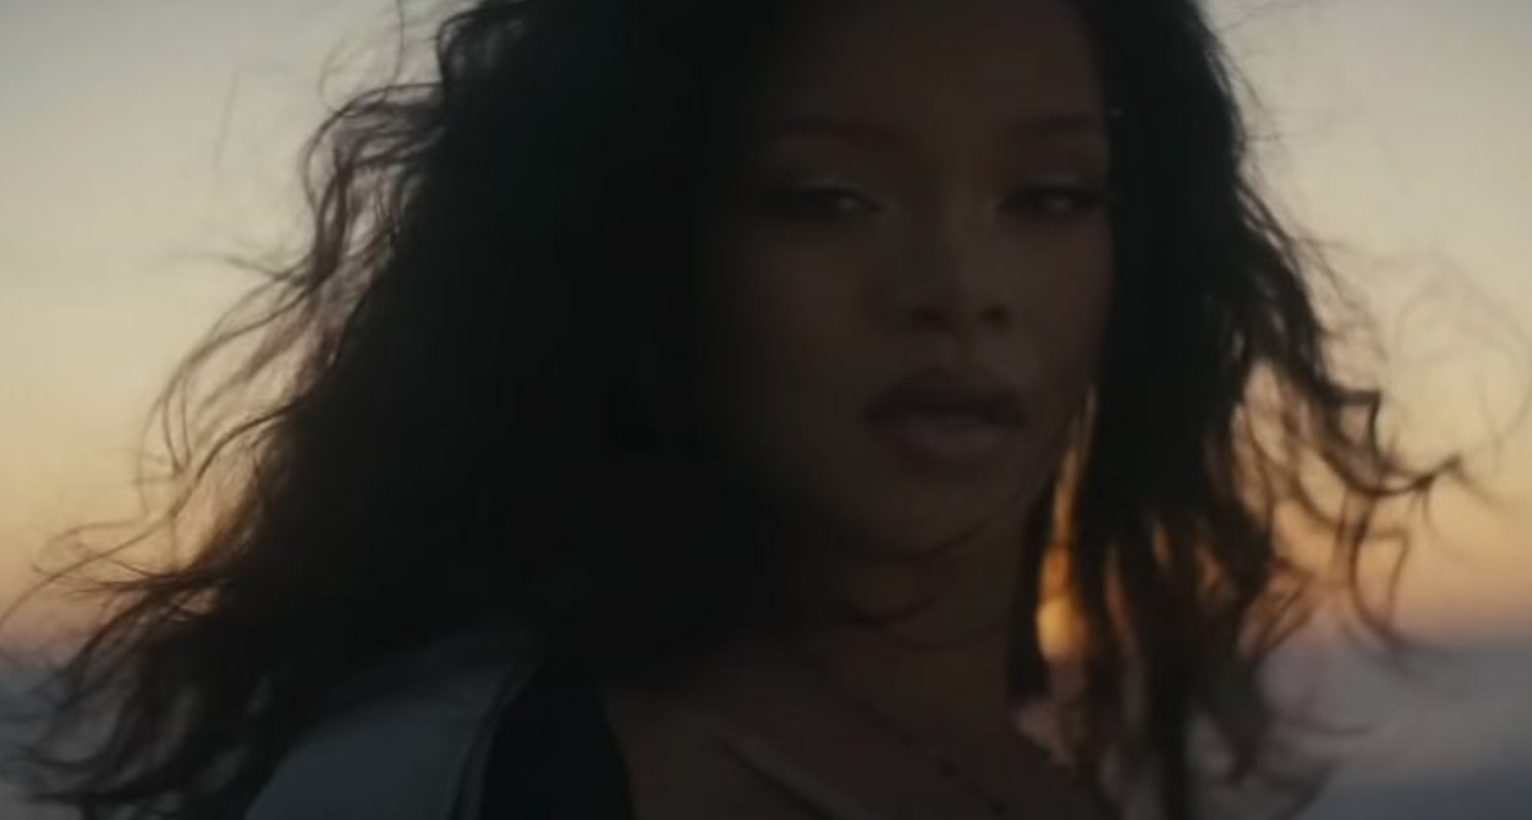 RIHANNA NABS ACADEMY AWARD NOMINATION FOR “LIFT ME UP” FROM ‘BLACK PANTHER: WAKANDA FOREVER’ SOUNDTRACK